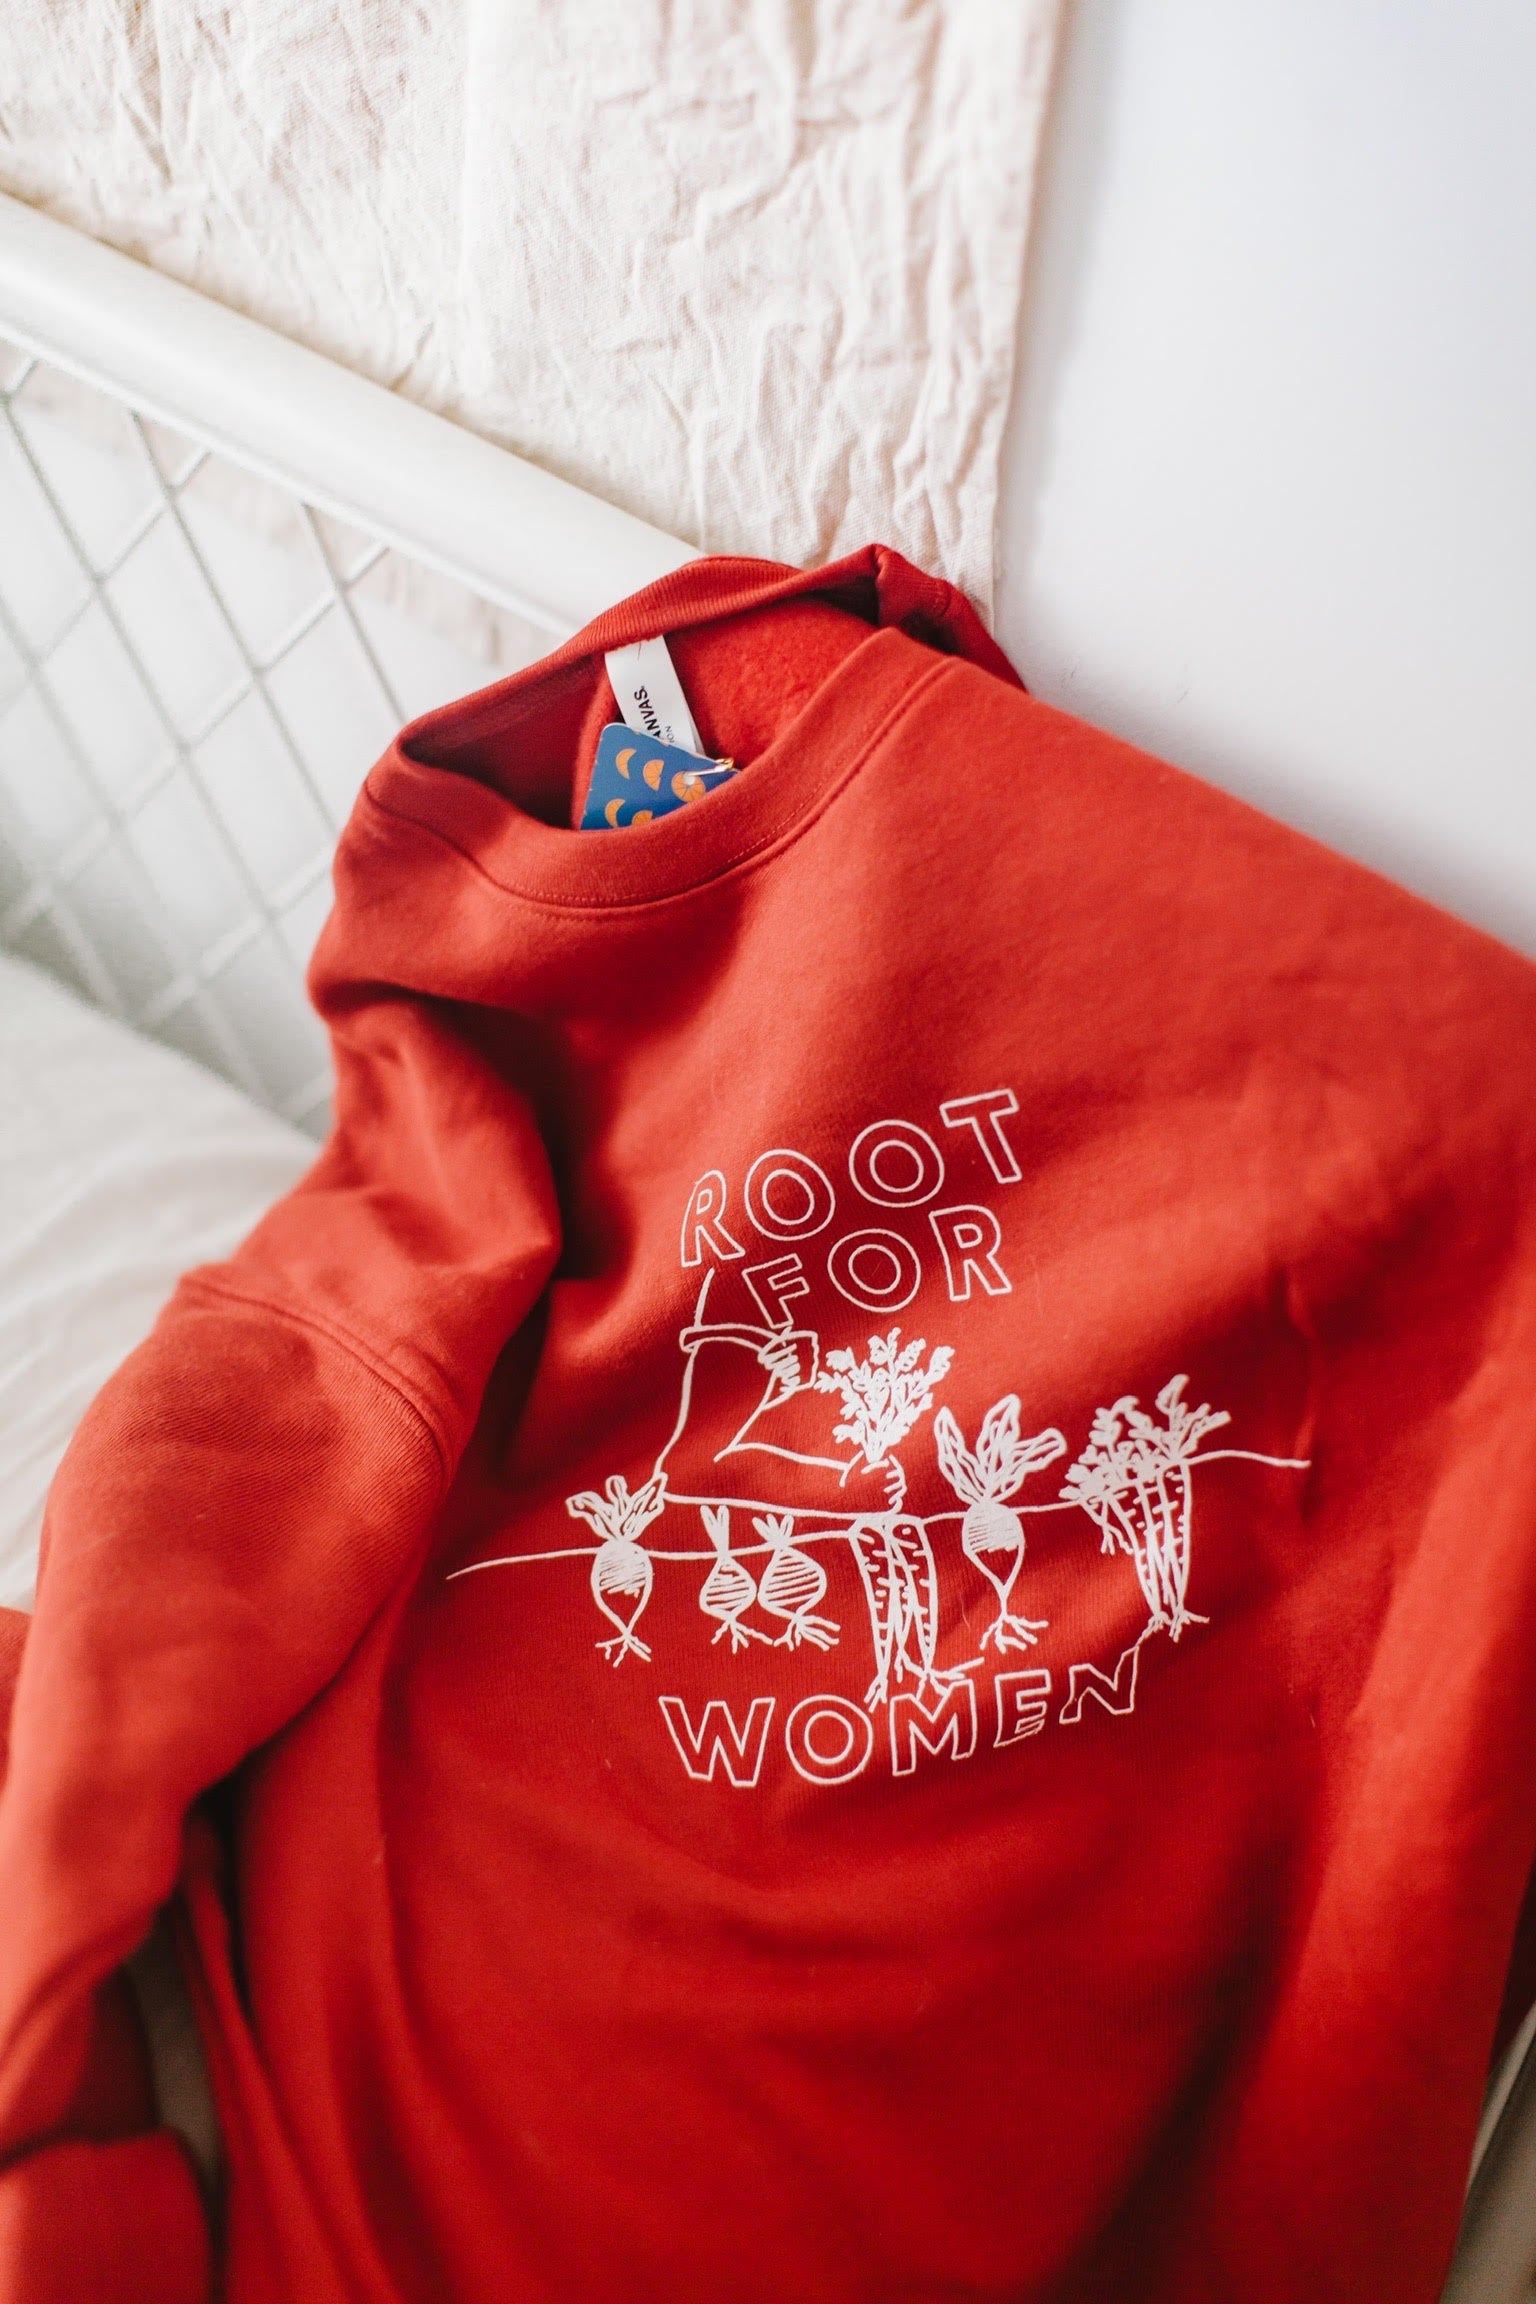 A red "Root for Women" sweatshirt draped on a bed frame